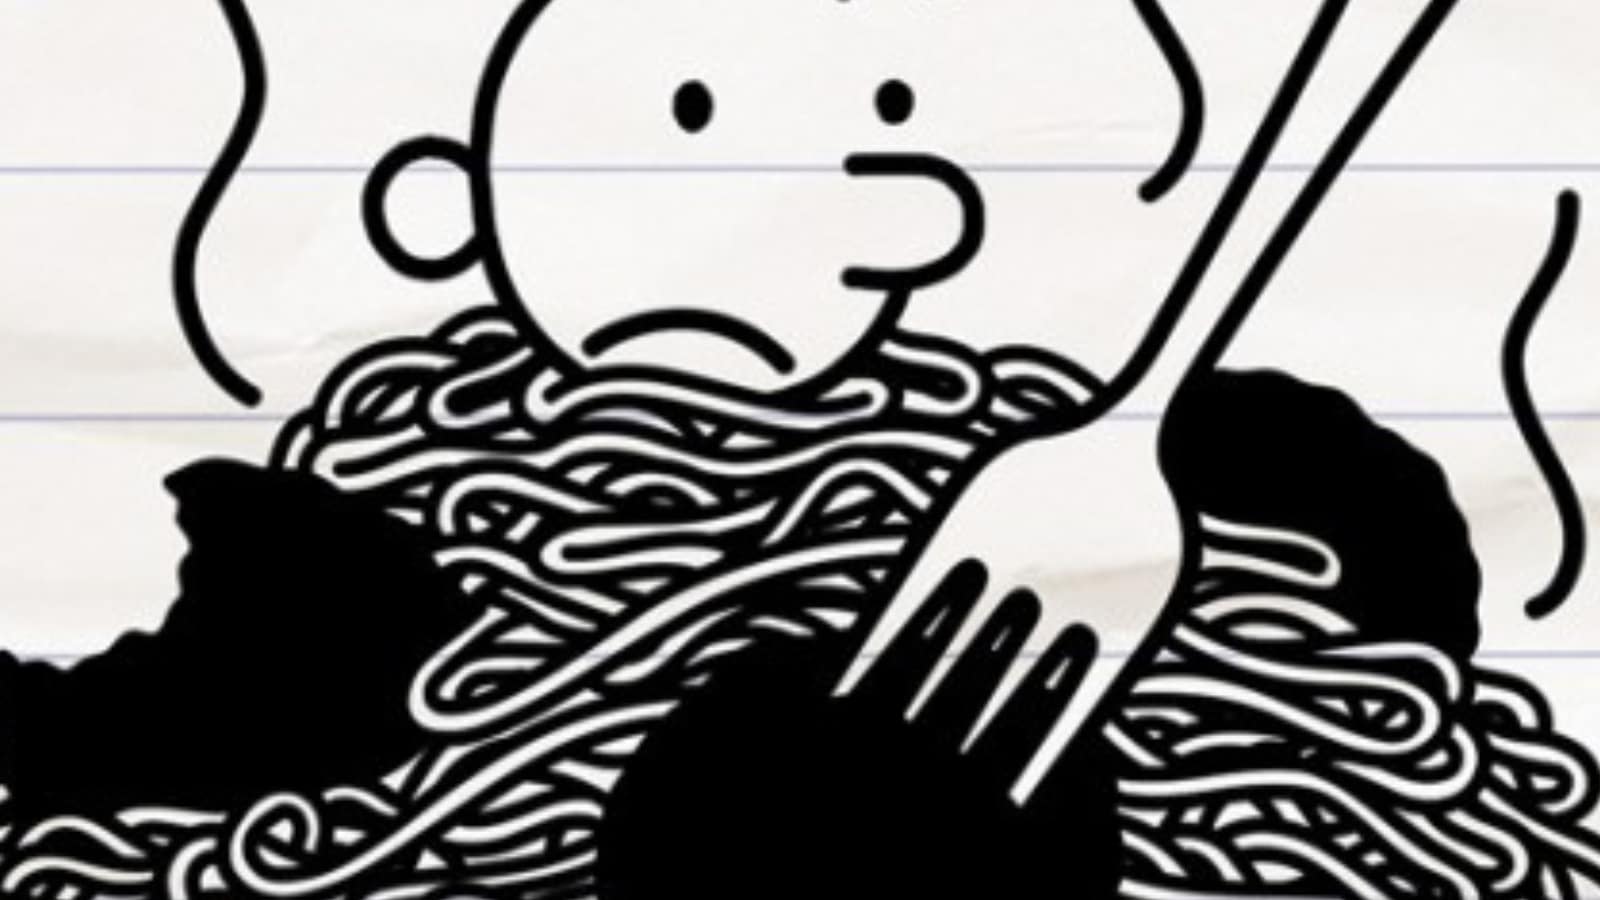 DIARY OF A WIMPY KID returns in October with HOT MESS